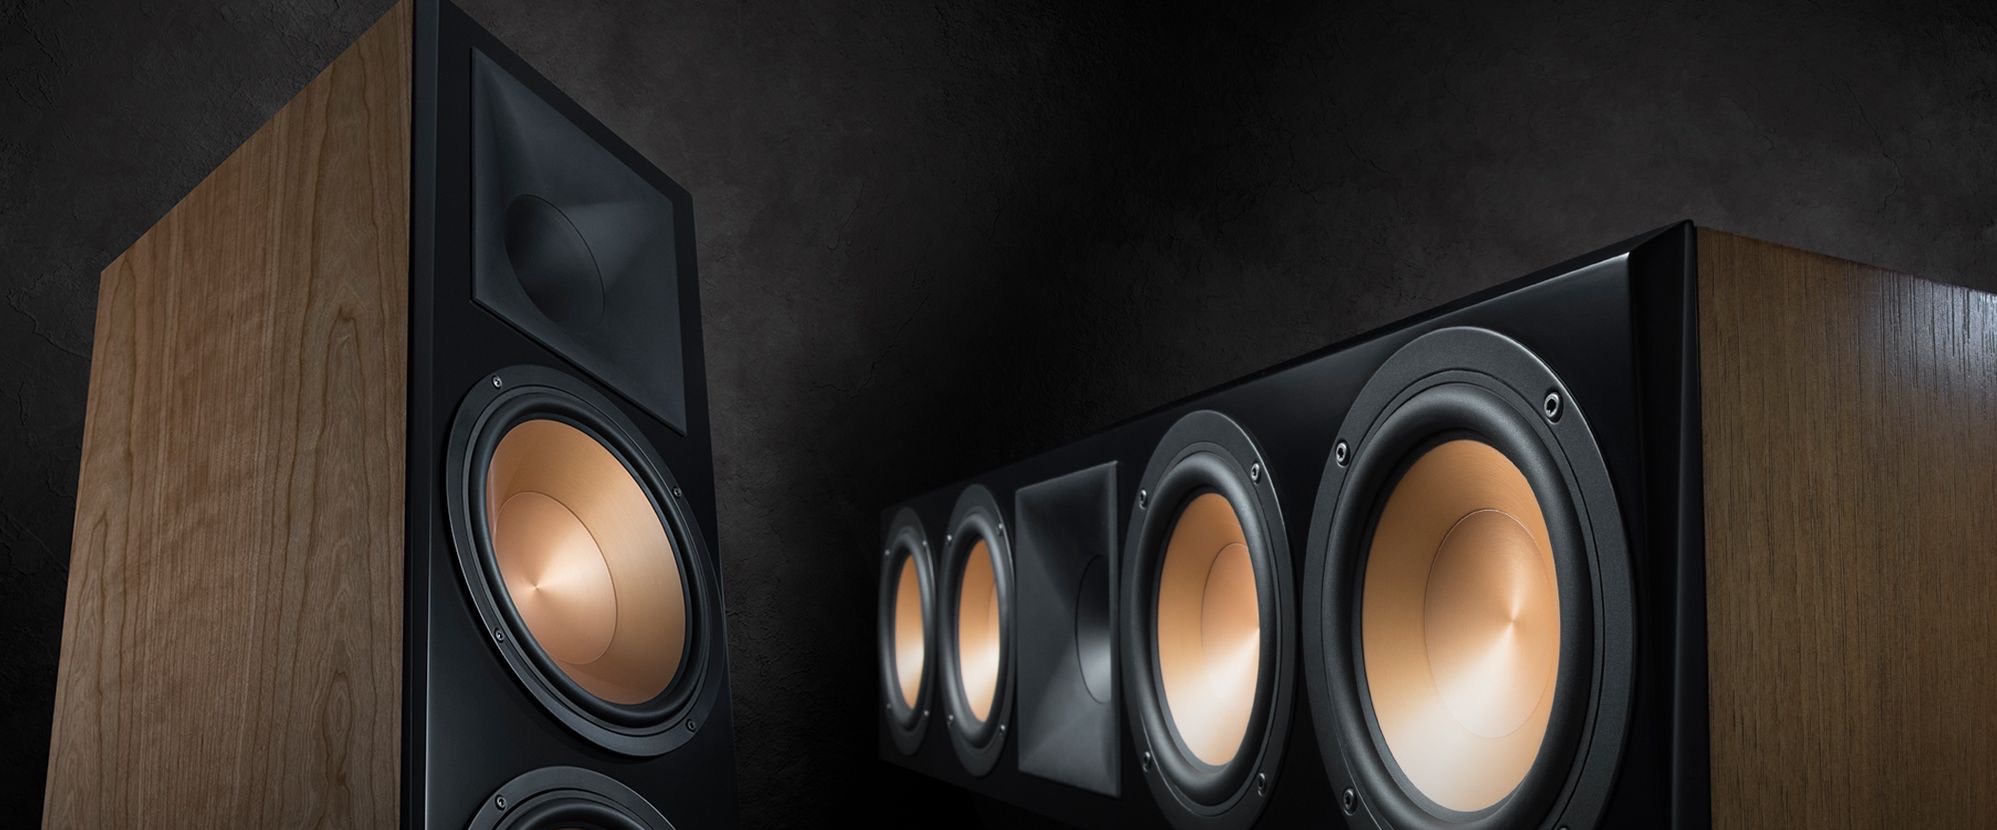 Klipsch's New Reference Speakers Raise the Home Theater Bar, Again ...